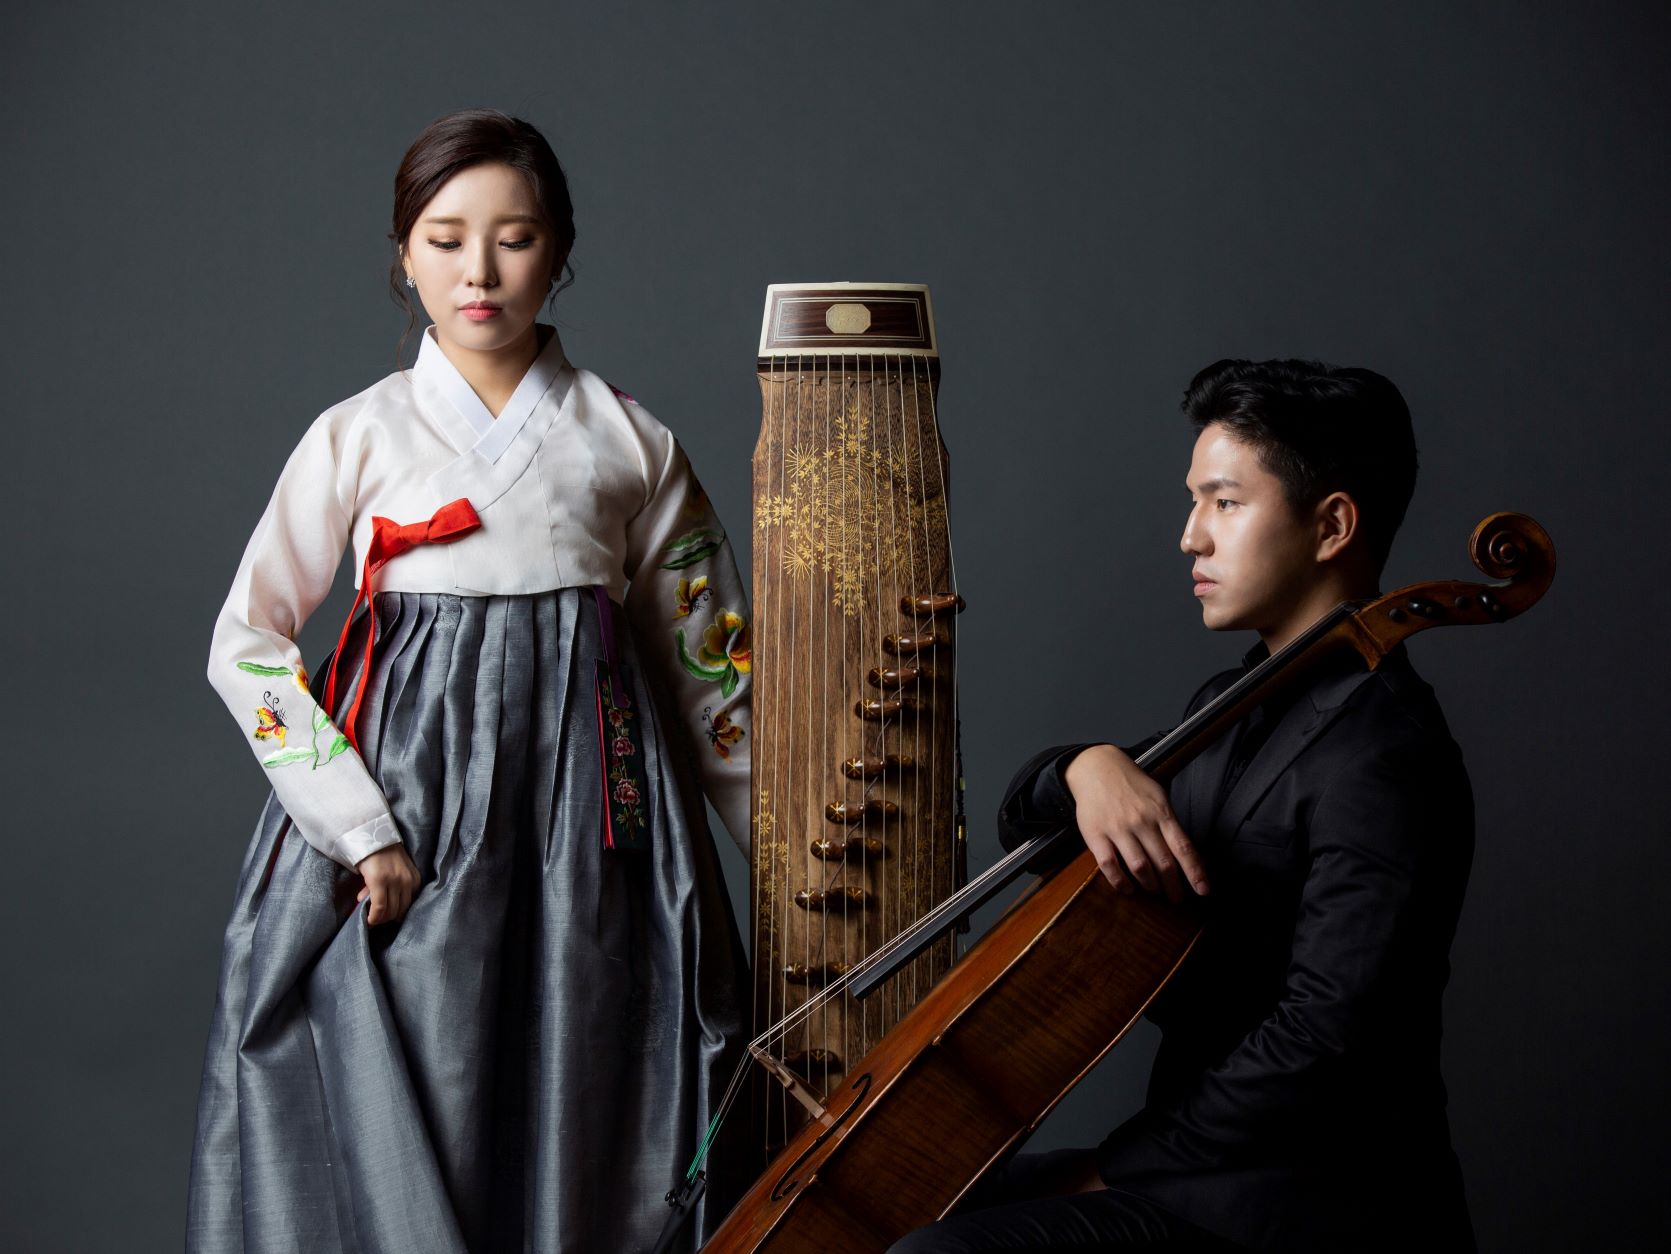 Color photo of CelloGayageum. Shot in front of a medium grey background, a woman in traditional Korean dress stands left one hand holding her long silk skirt and the other balancing a Gayageum, a traditional stringed instrument. To her right, a man sits in side profile holding a cello. He wears a dark suit.